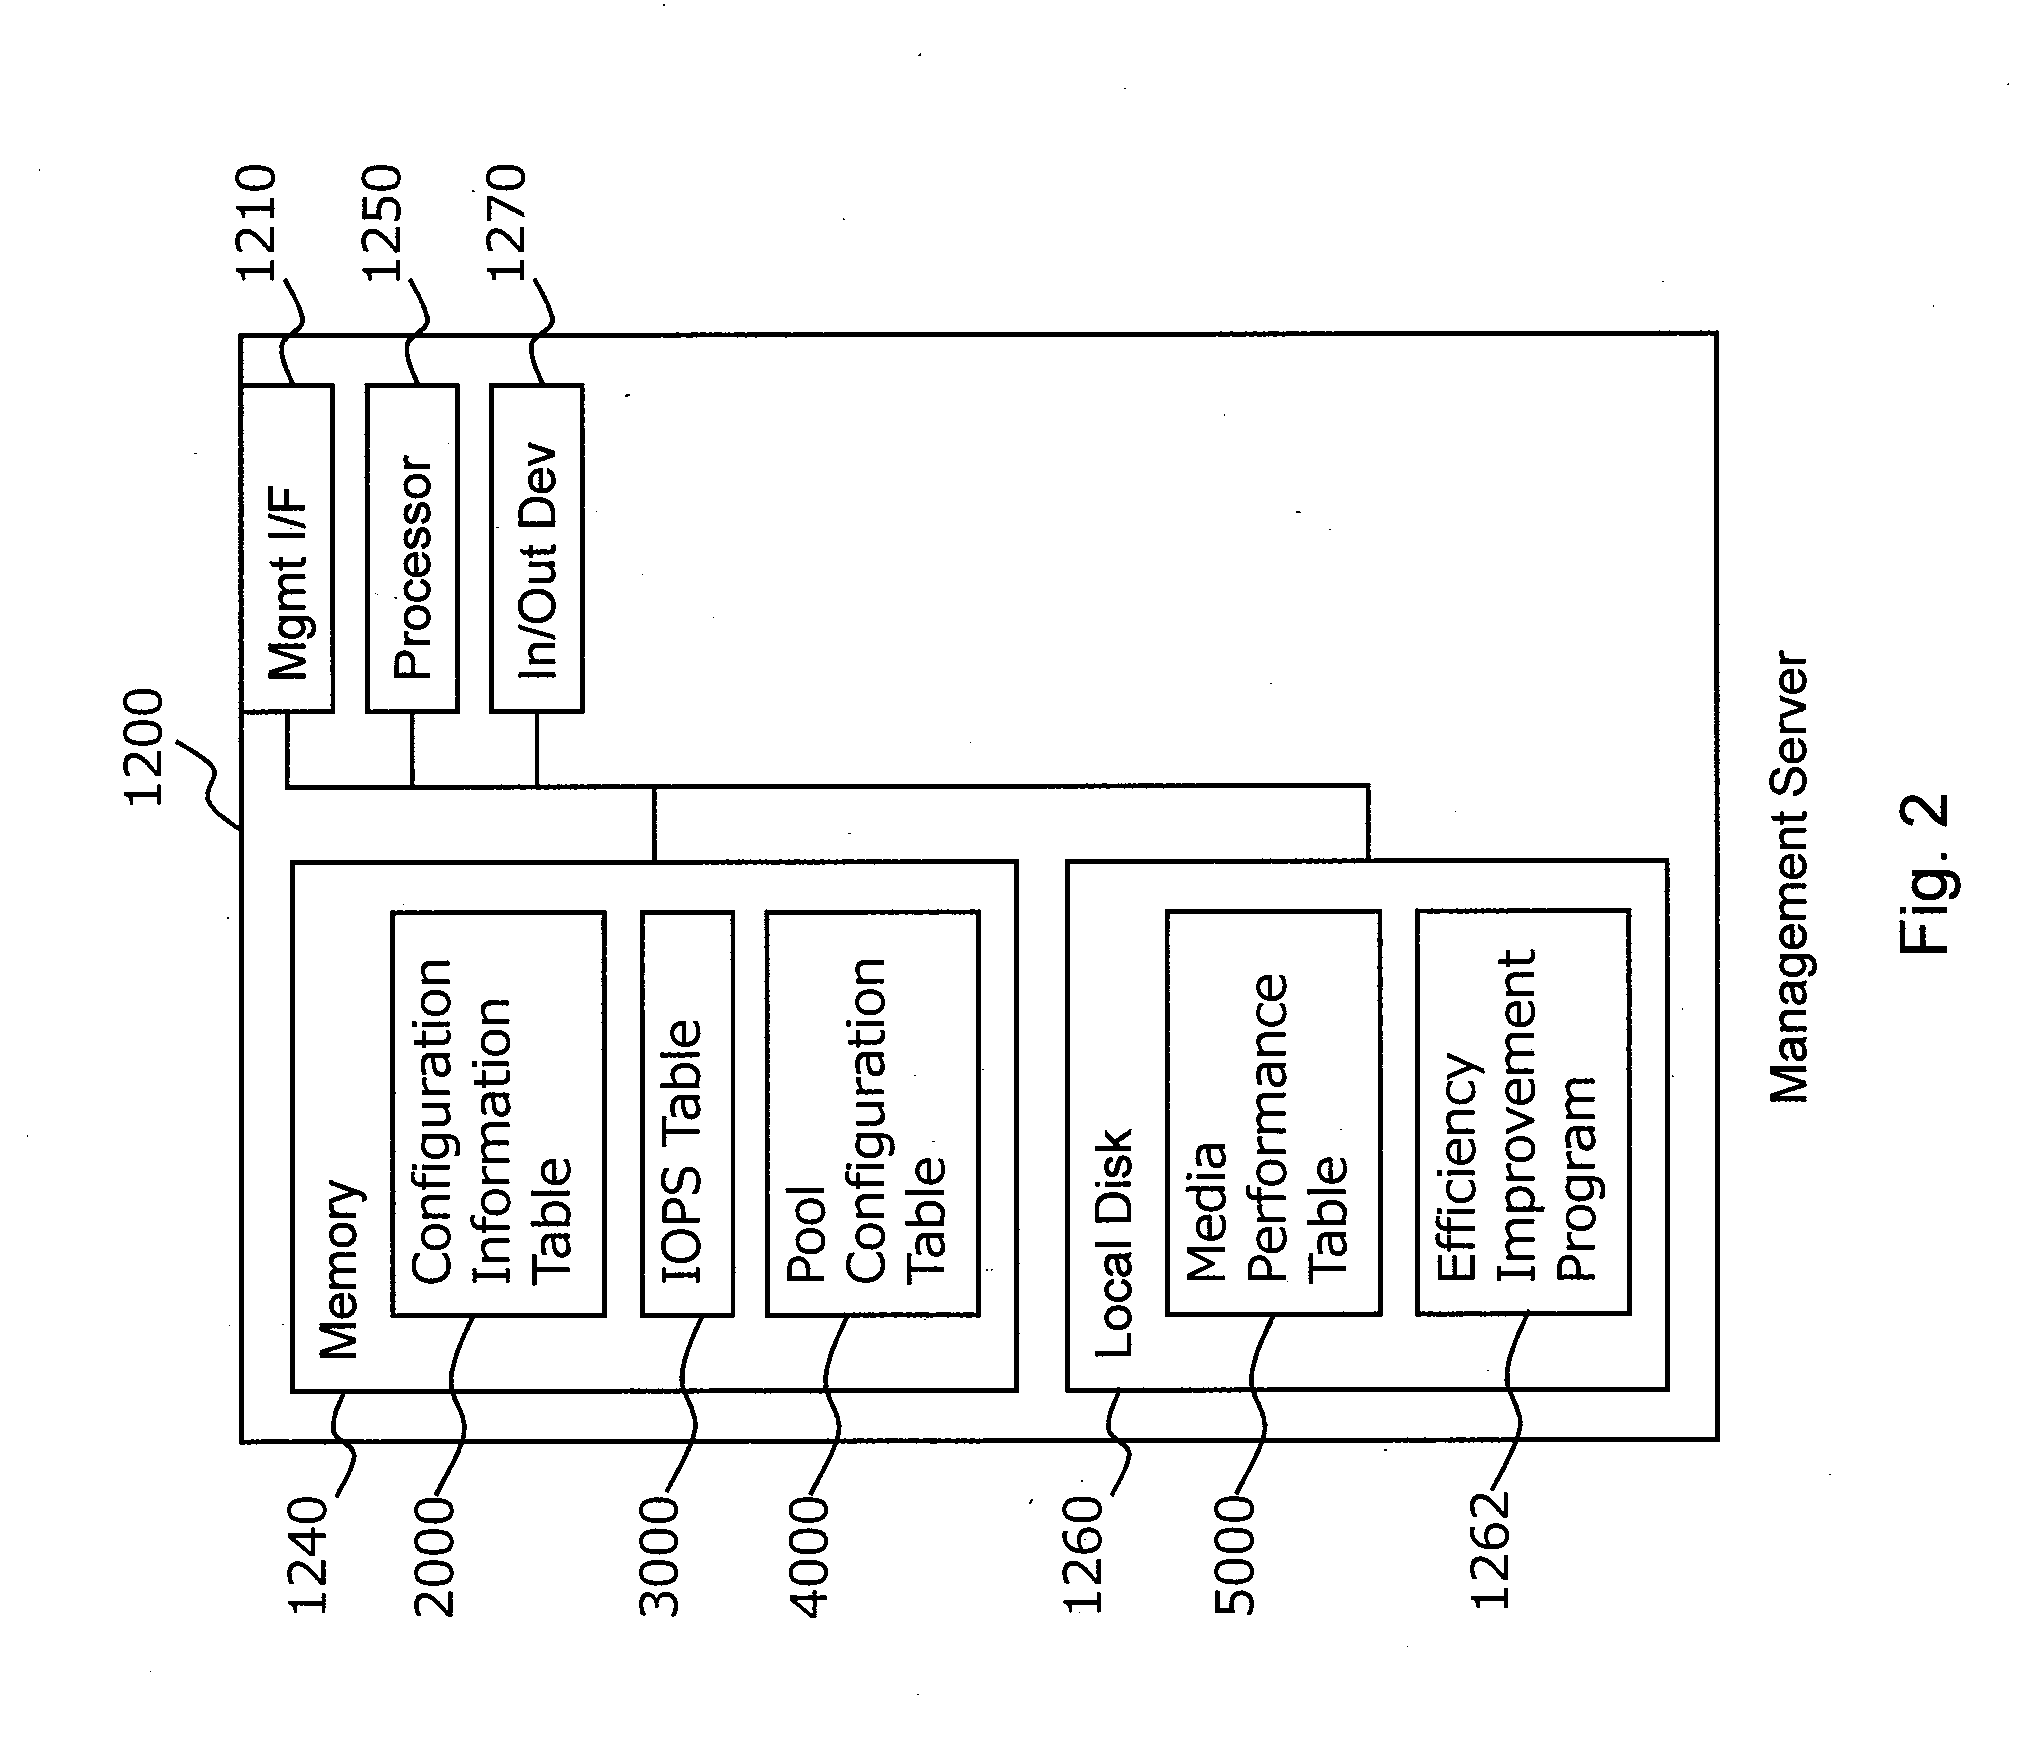 Method and apparatus to improve efficiency in the use of resources in data center